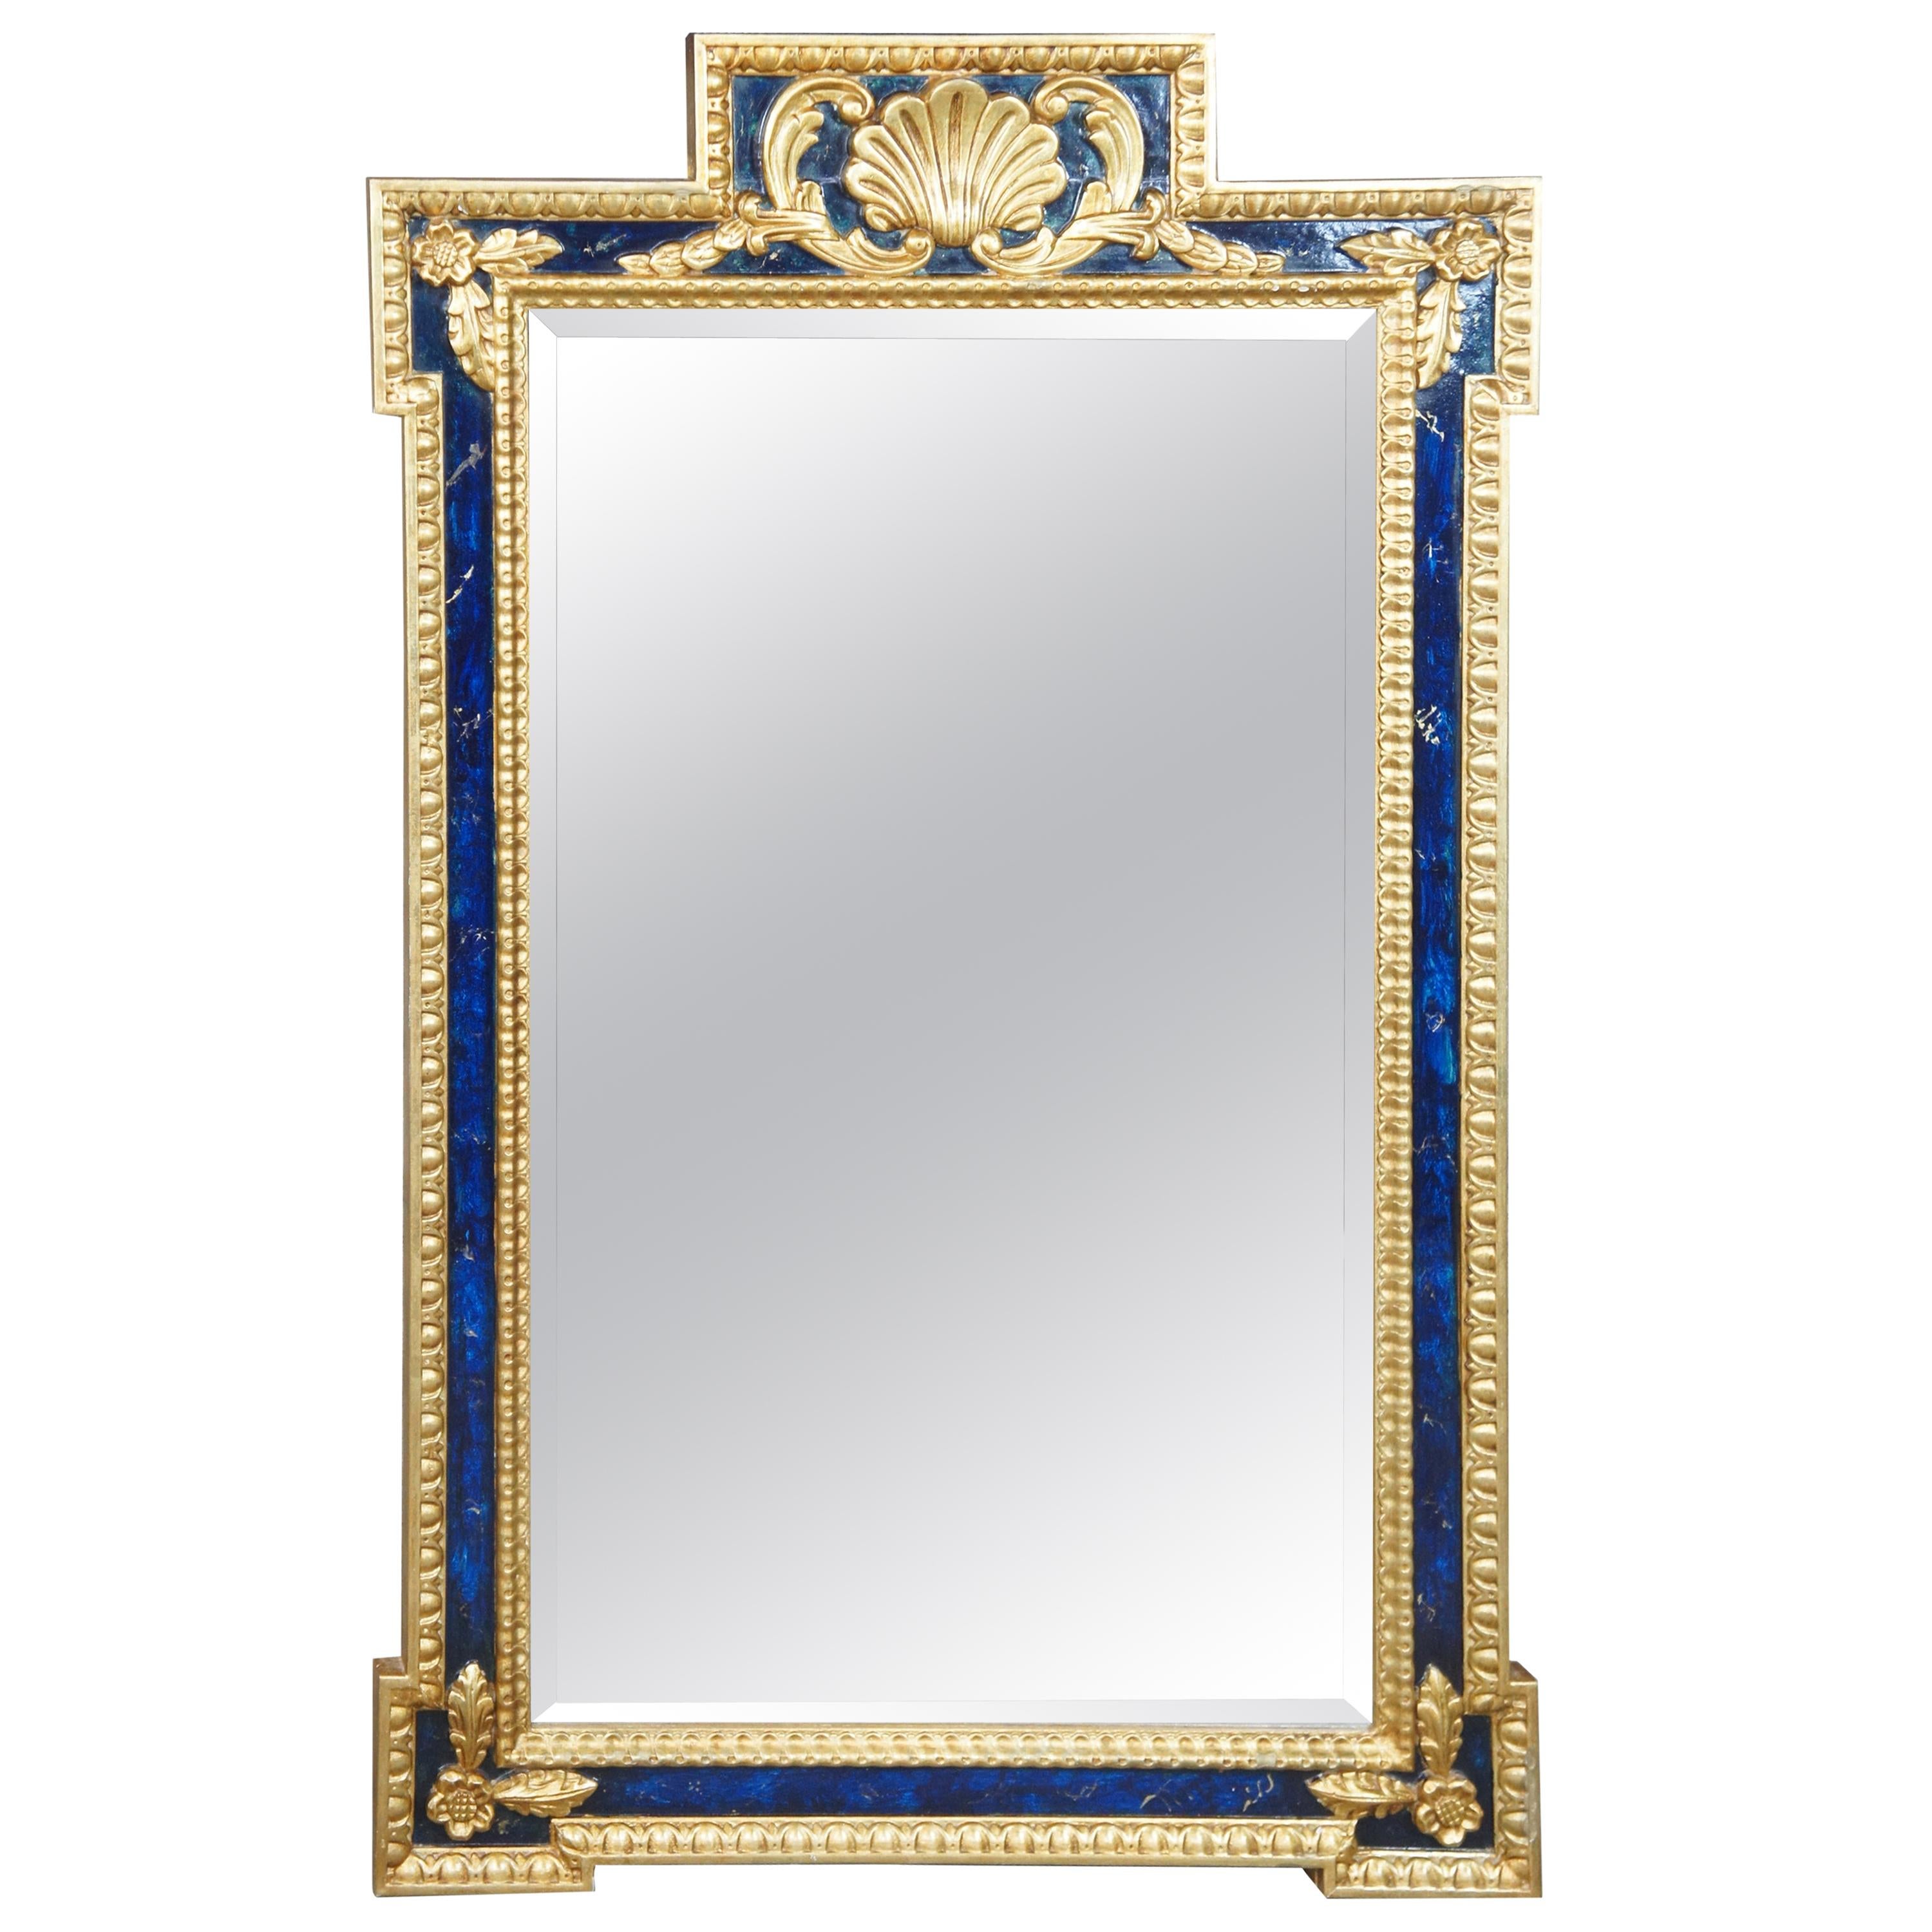 Ornate French Chelsea House Empire Style Blue and Gold Mirror Scalloped